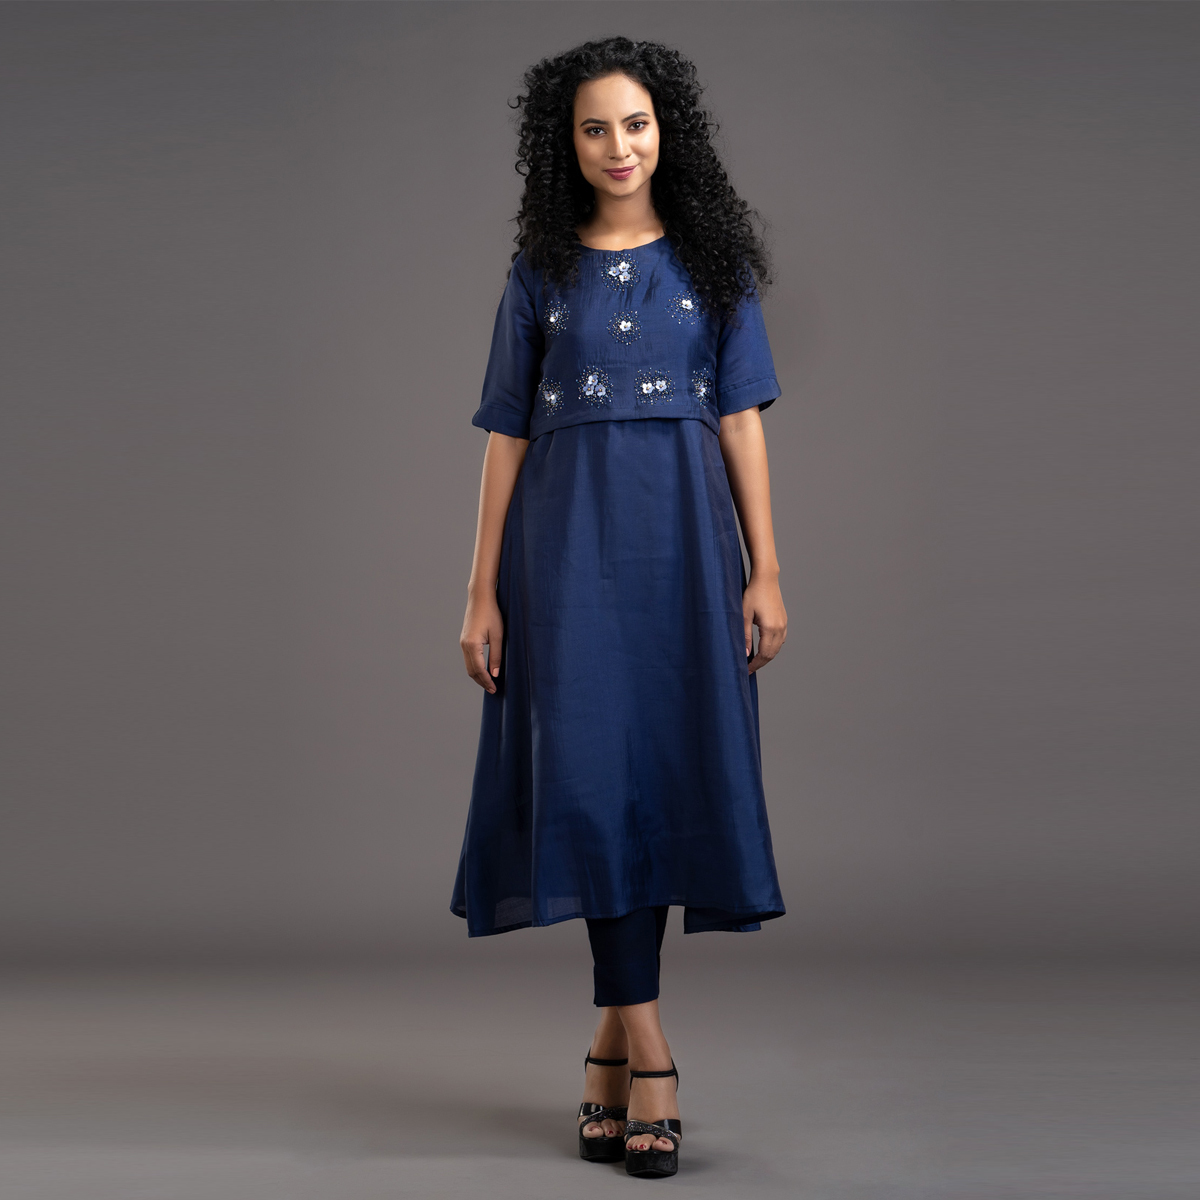 Zella Solid Color Cape Style pure chanderi silk A-line kurta with Embellishments - Navy Blue